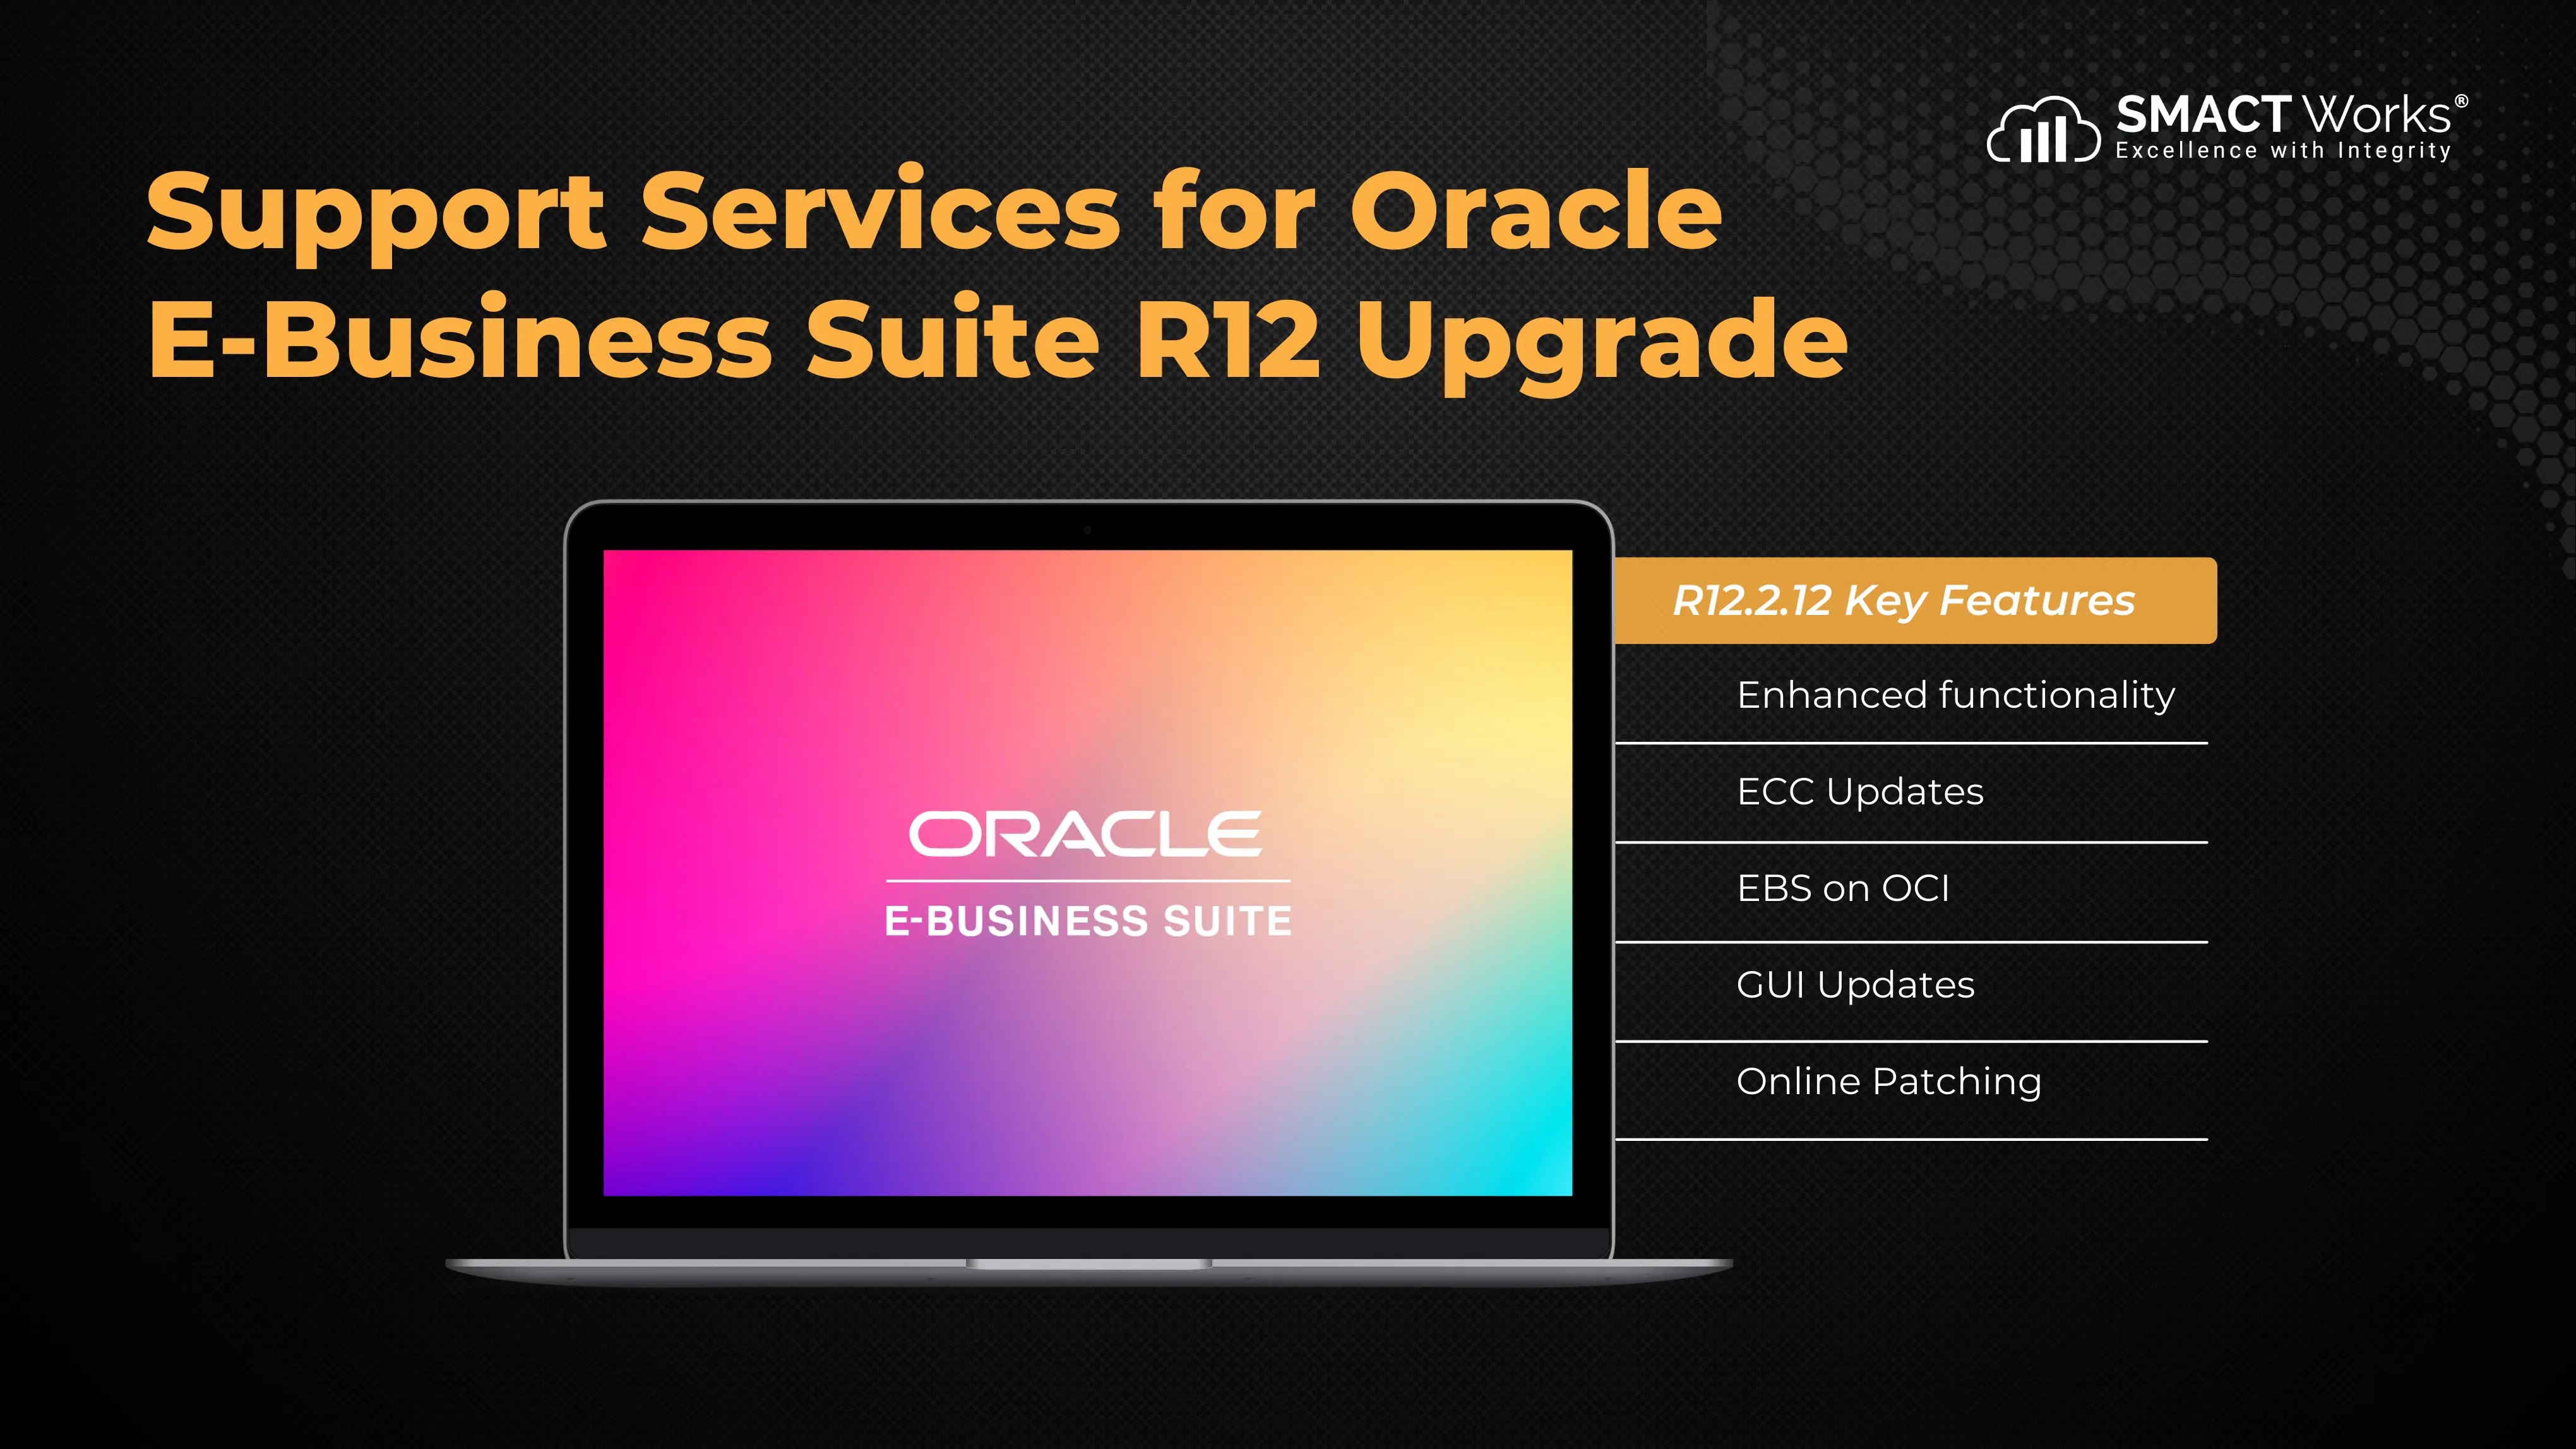 Support Services for Oracle E-Business Suite R12 Upgrade